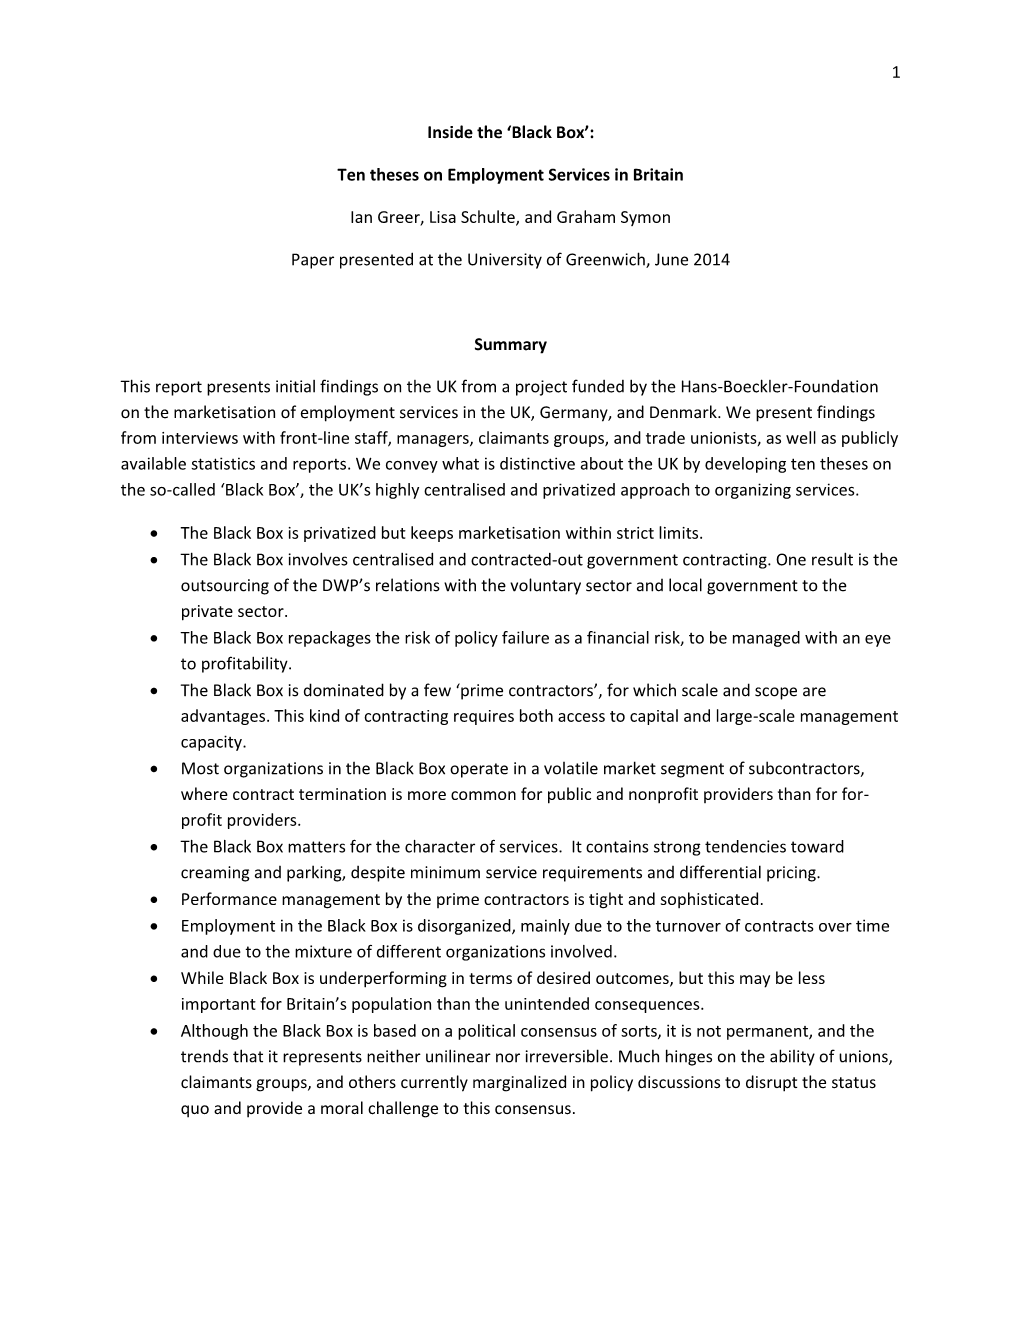 1 Inside the 'Black Box': Ten Theses on Employment Services in Britain Ian